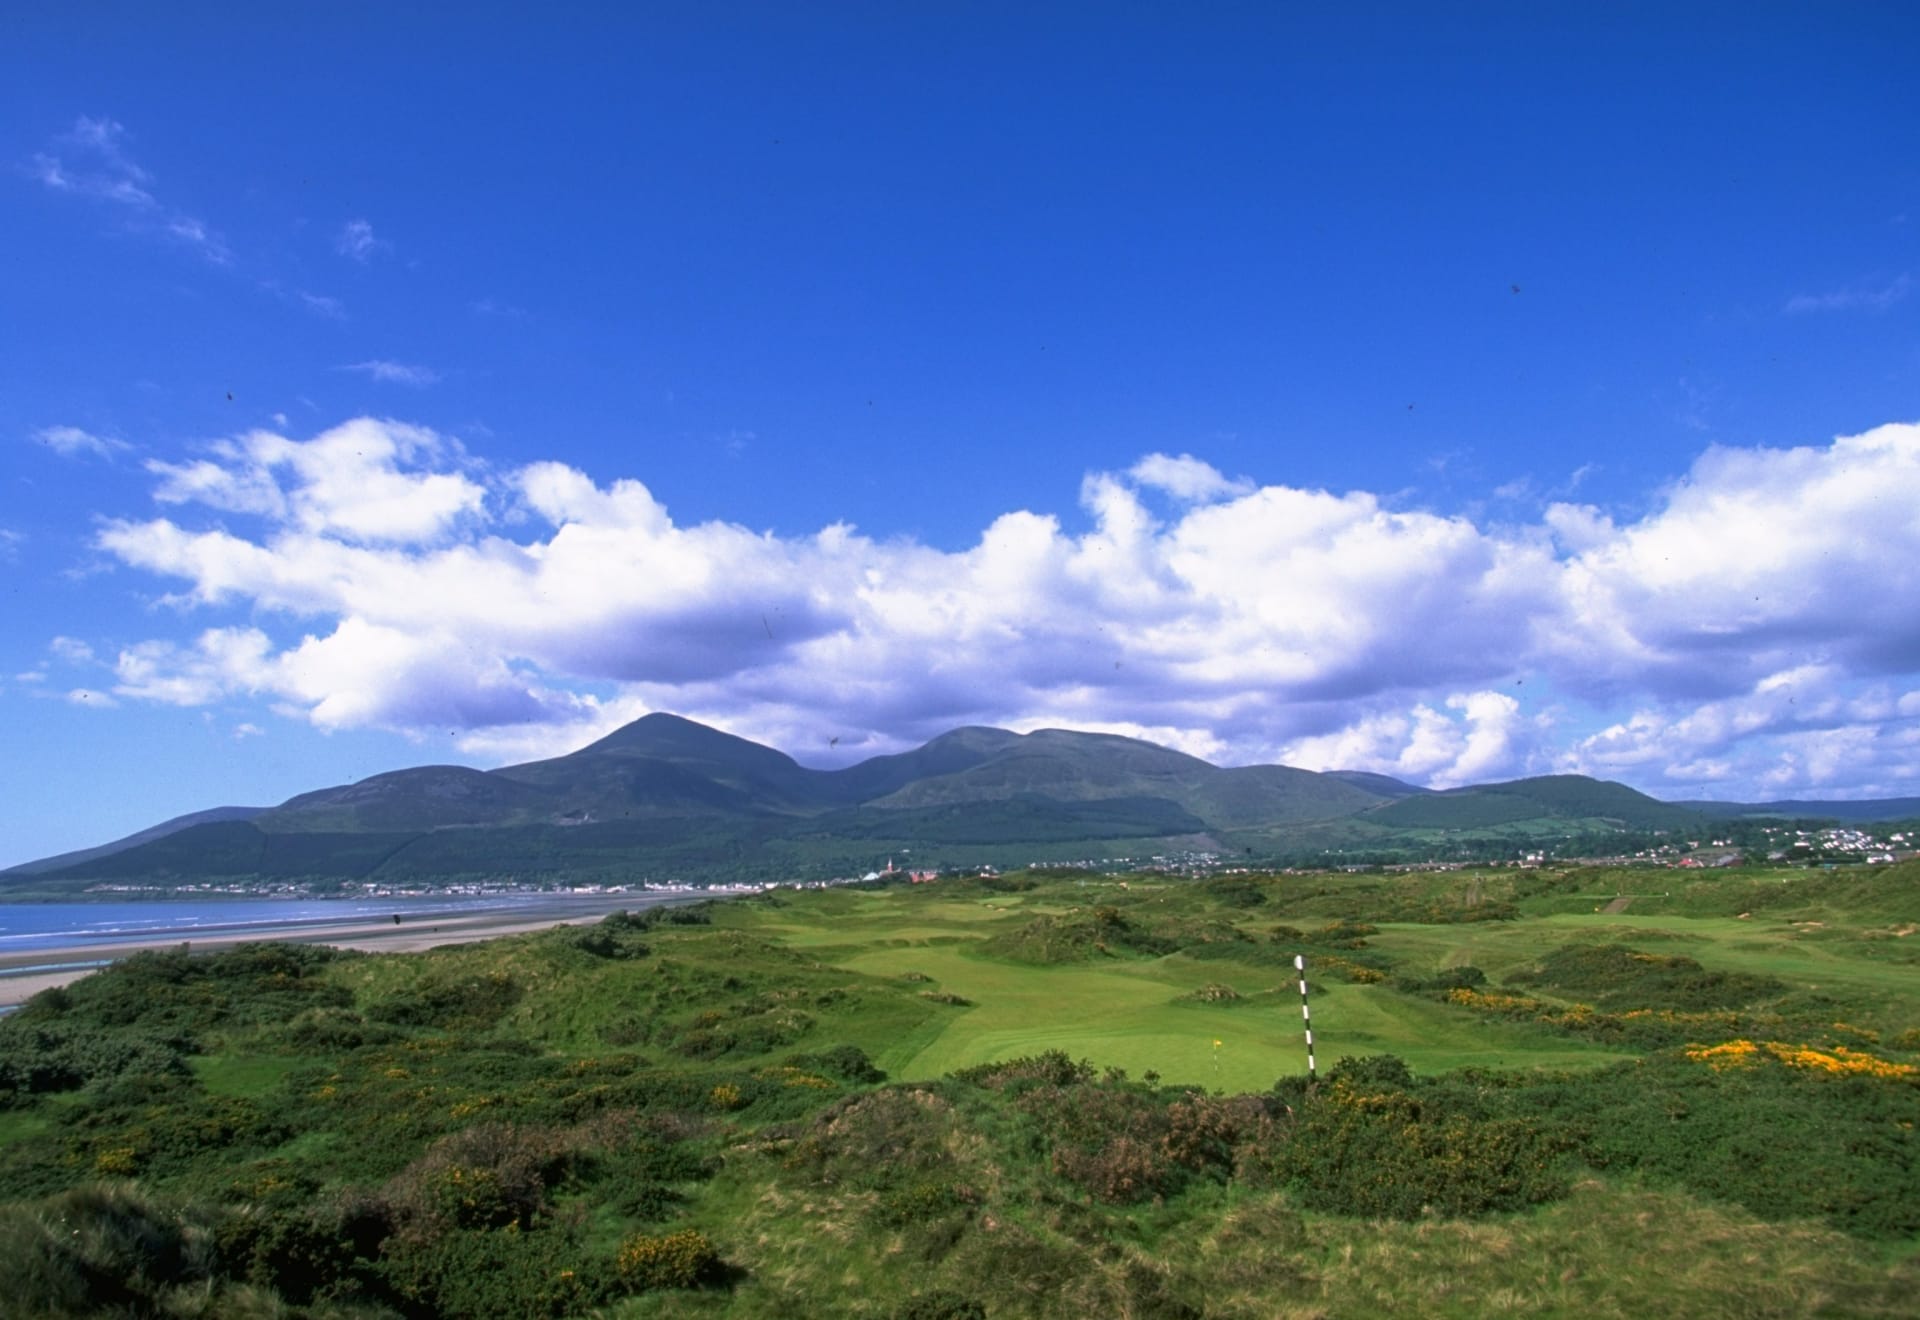 One of them made a player cry.  Here are the 10 most difficult golf courses in the world